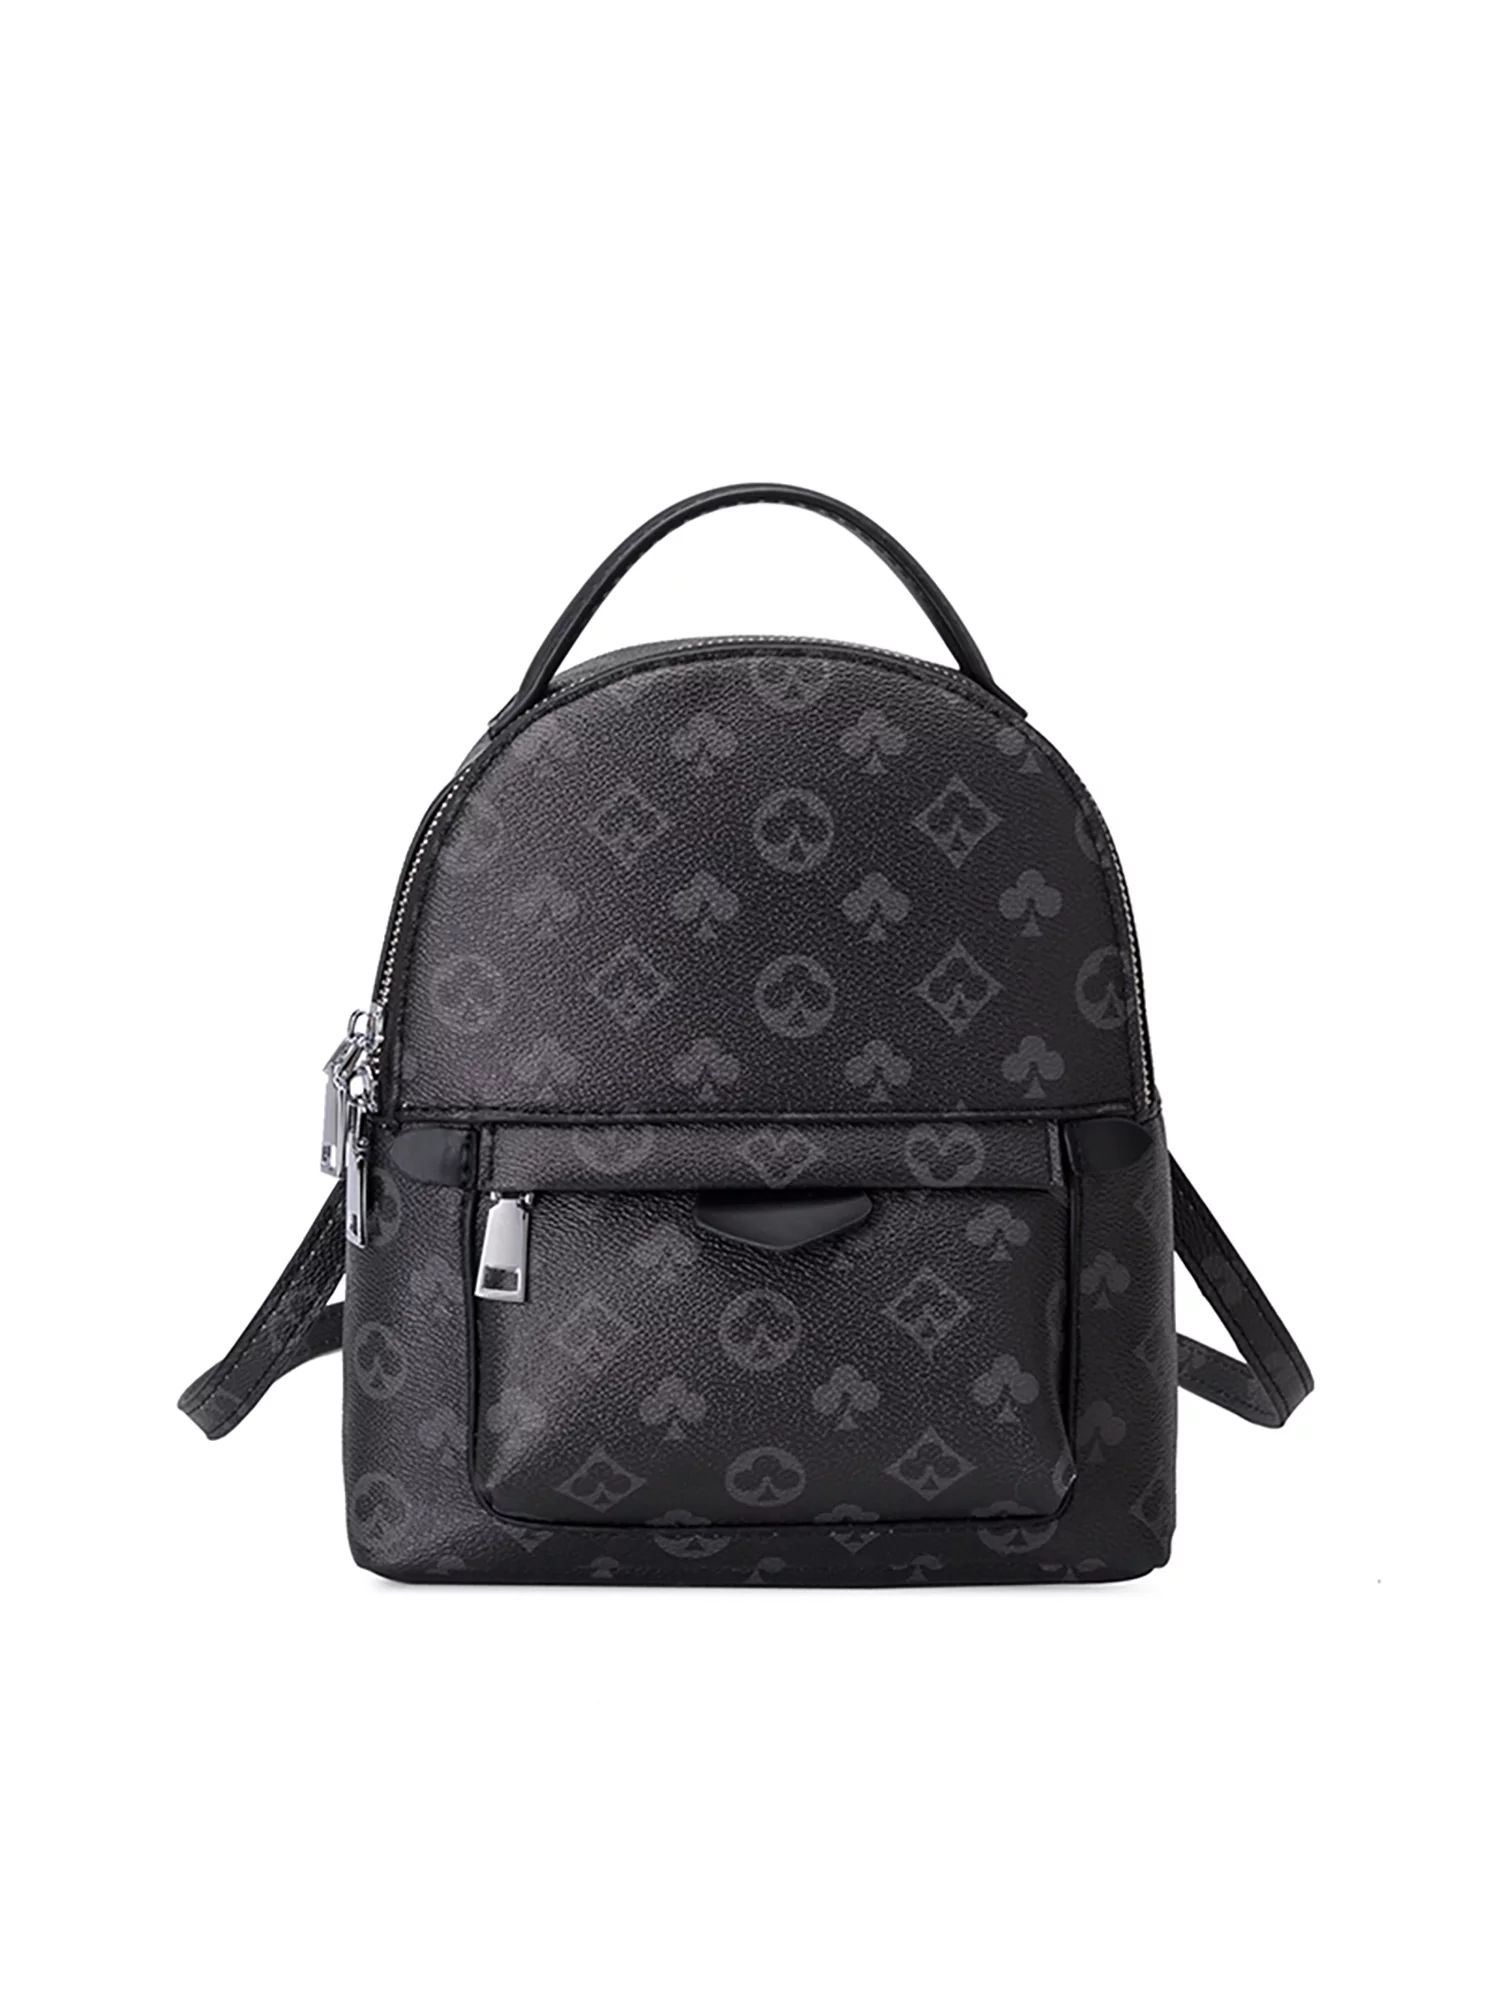 Sexy Dance Checkered Tote Shoulder Handbags Bag with inner pouch PU Vegan Leather Backpack School... | Walmart (US)